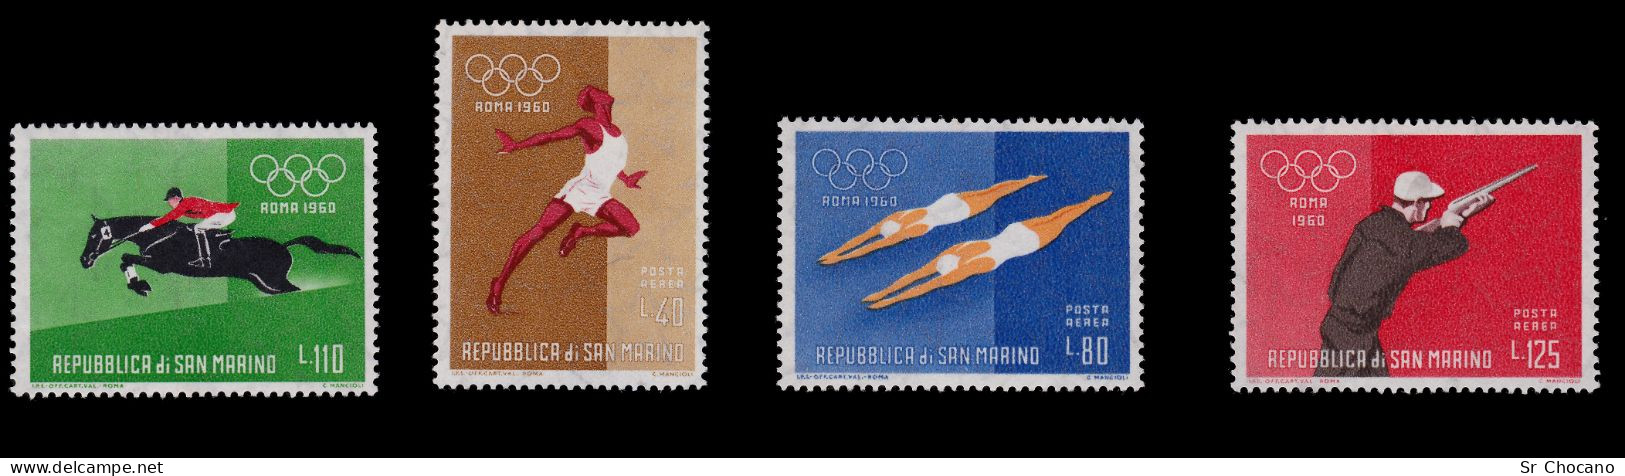 SAN MARINO STAMPS.1960.17th Olympic Games Rome.SCOTT 456-465,C111-C114.MNH. - Unused Stamps